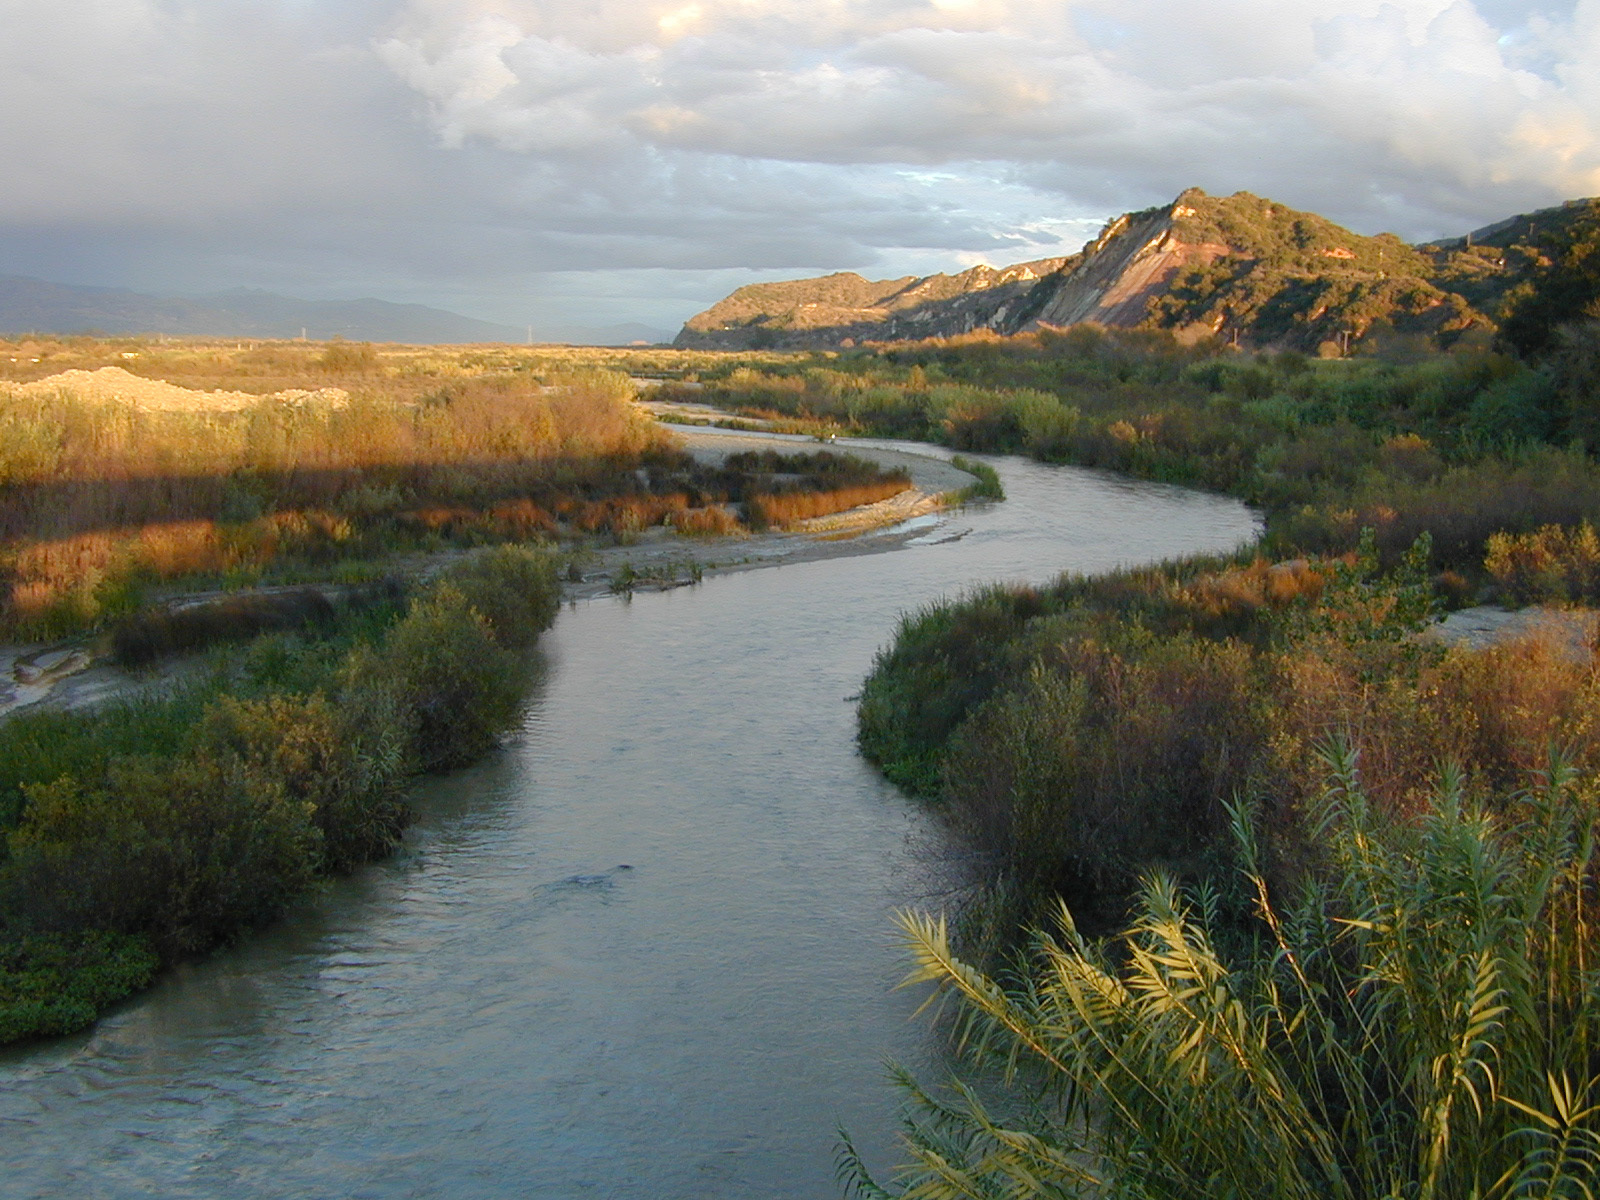 Santa Clara River snaking through vegetation, with exotic species in the foreground.